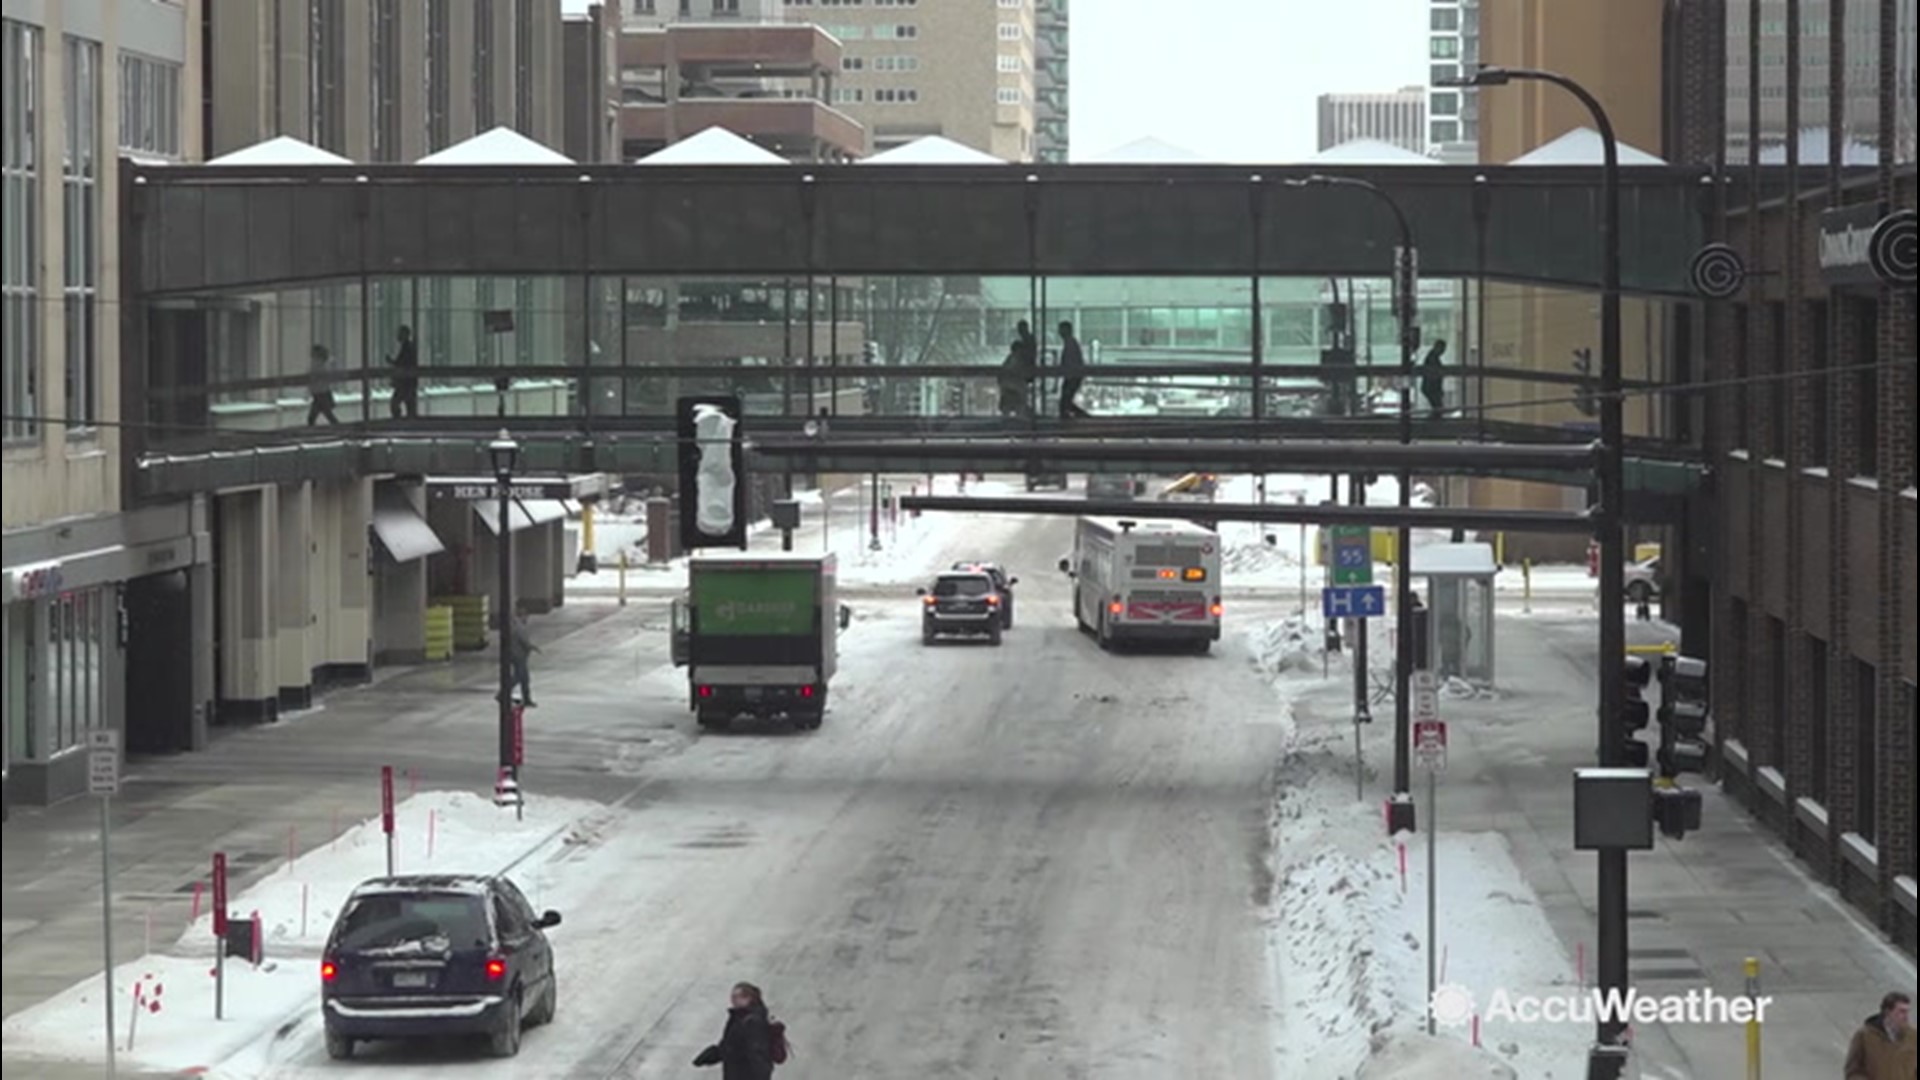 Frigid cold grips Minneapolis, Minnesota, but people are escaping through the Skyway system. Jonathan Petramala visited on Dec. 10 and explains how it works.